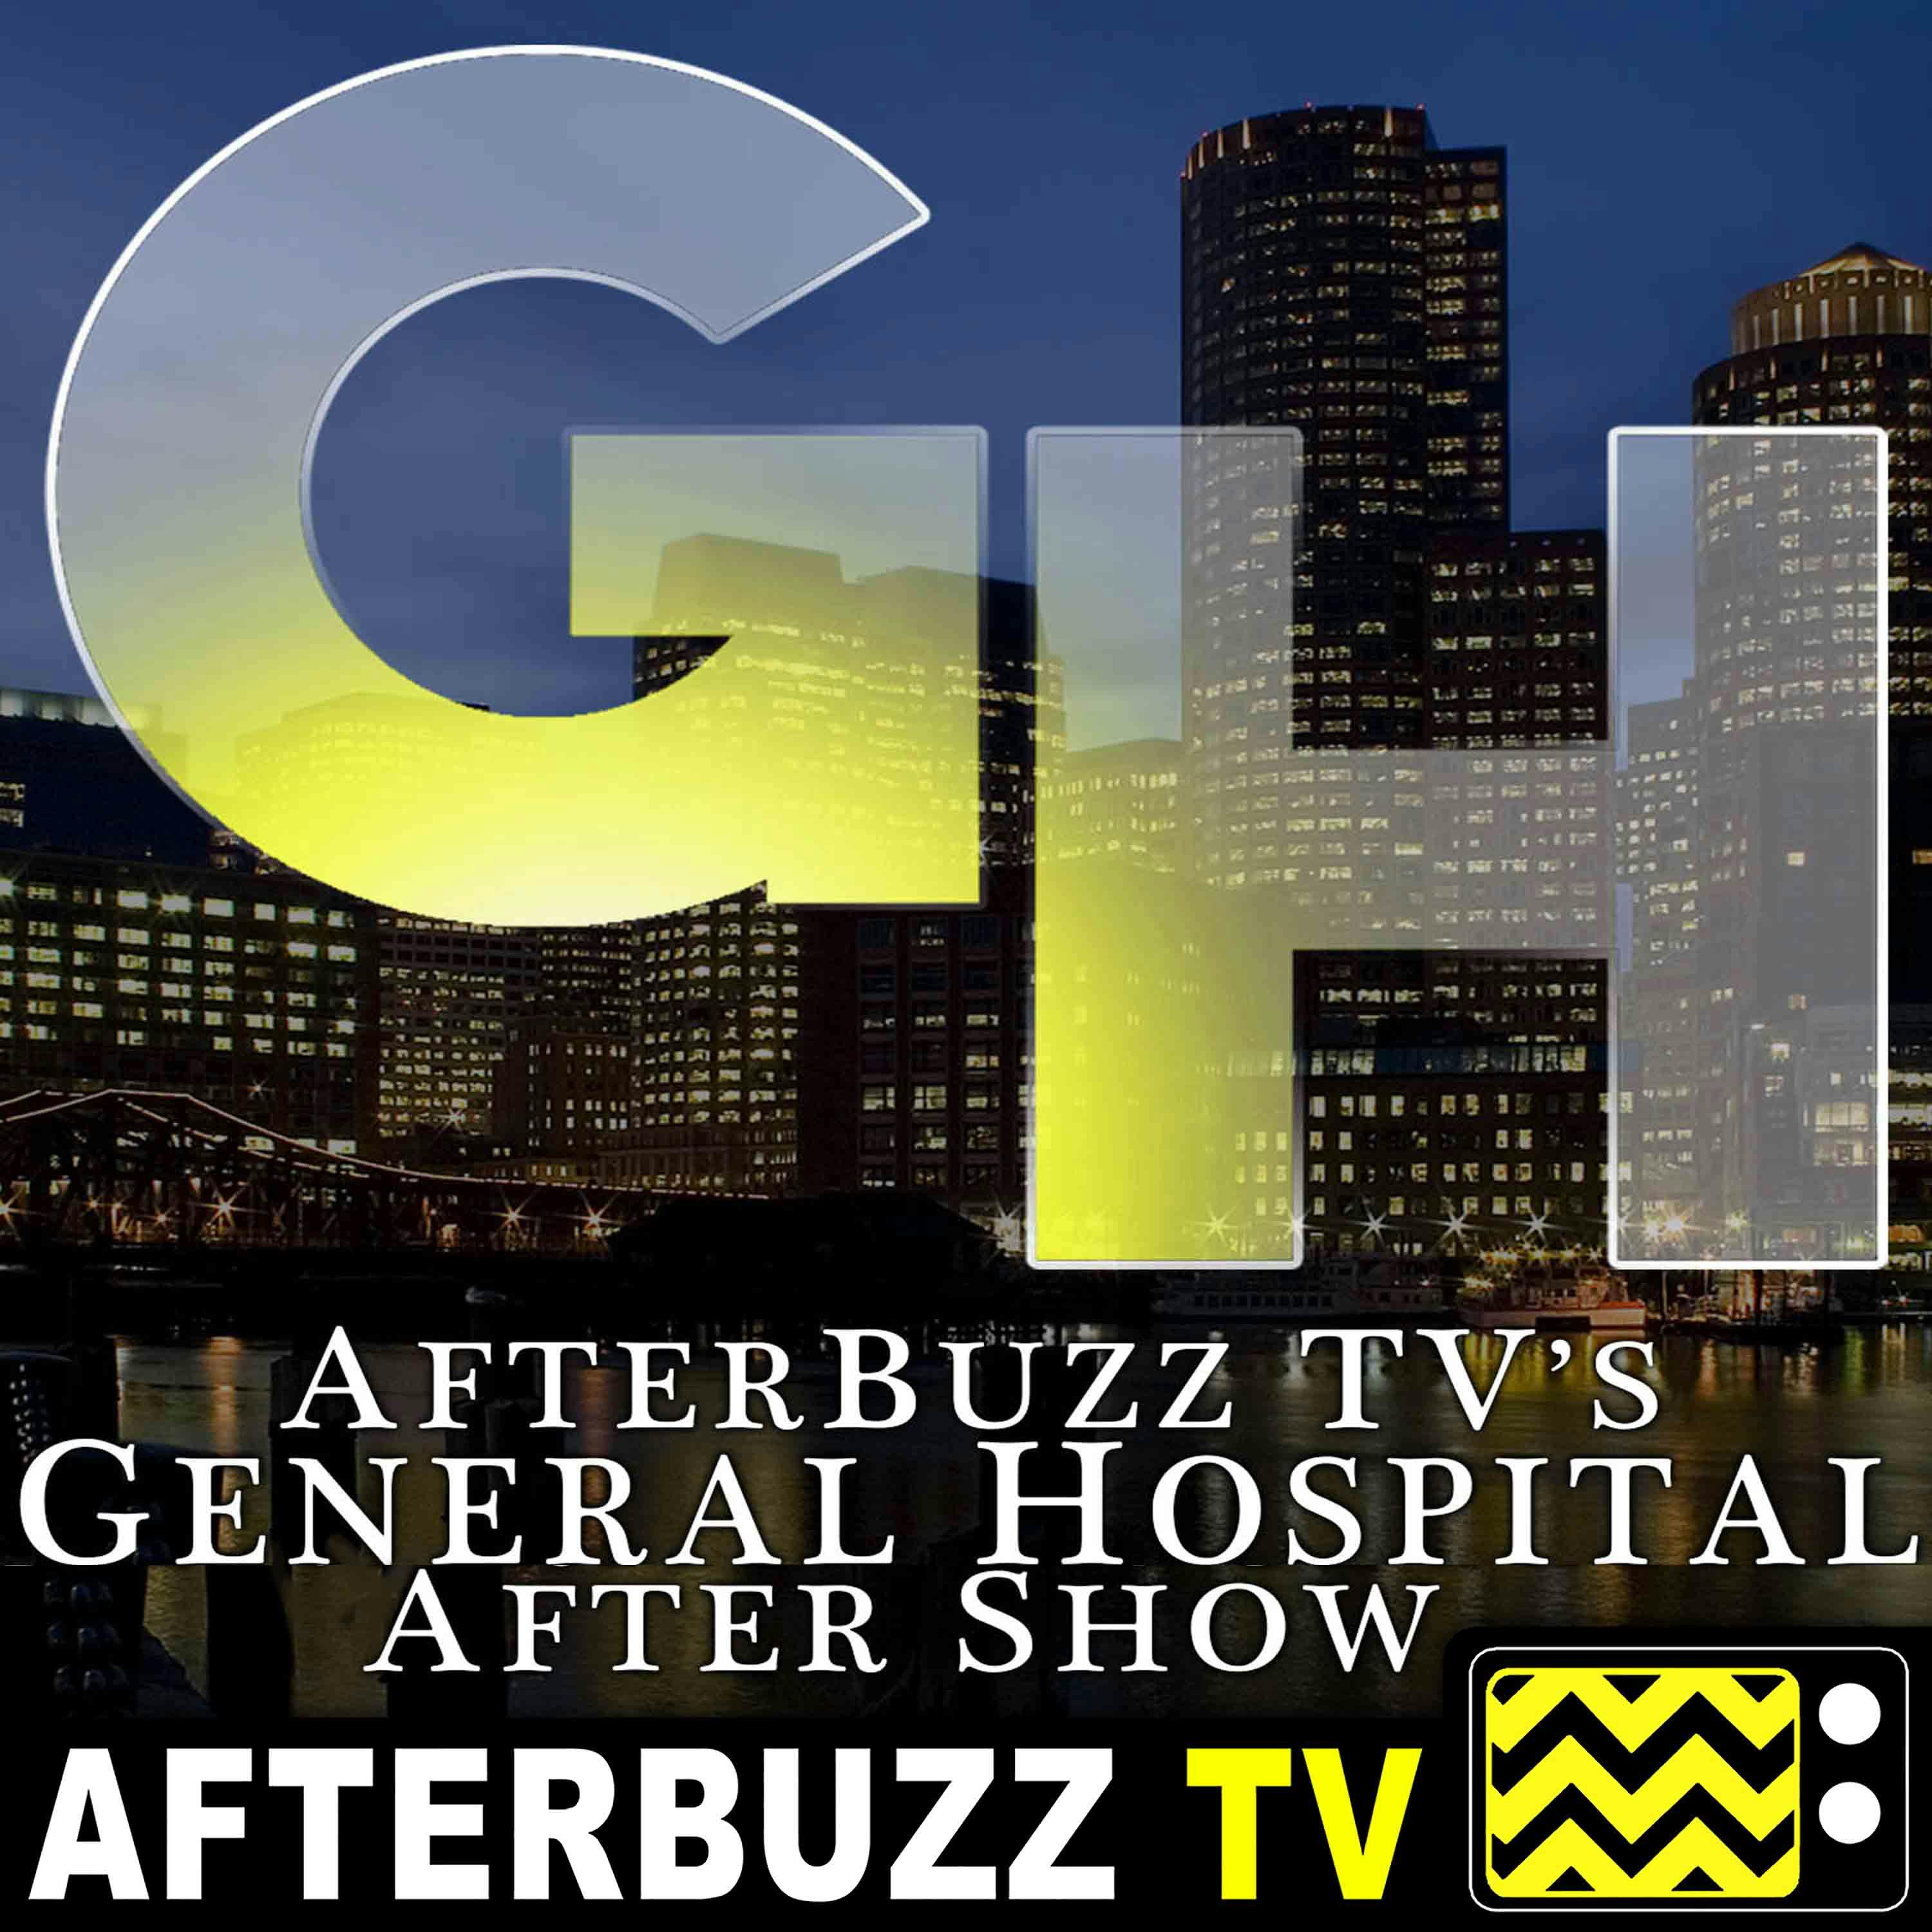 Review Of General Hospital for October 29th - November 2nd, 2018